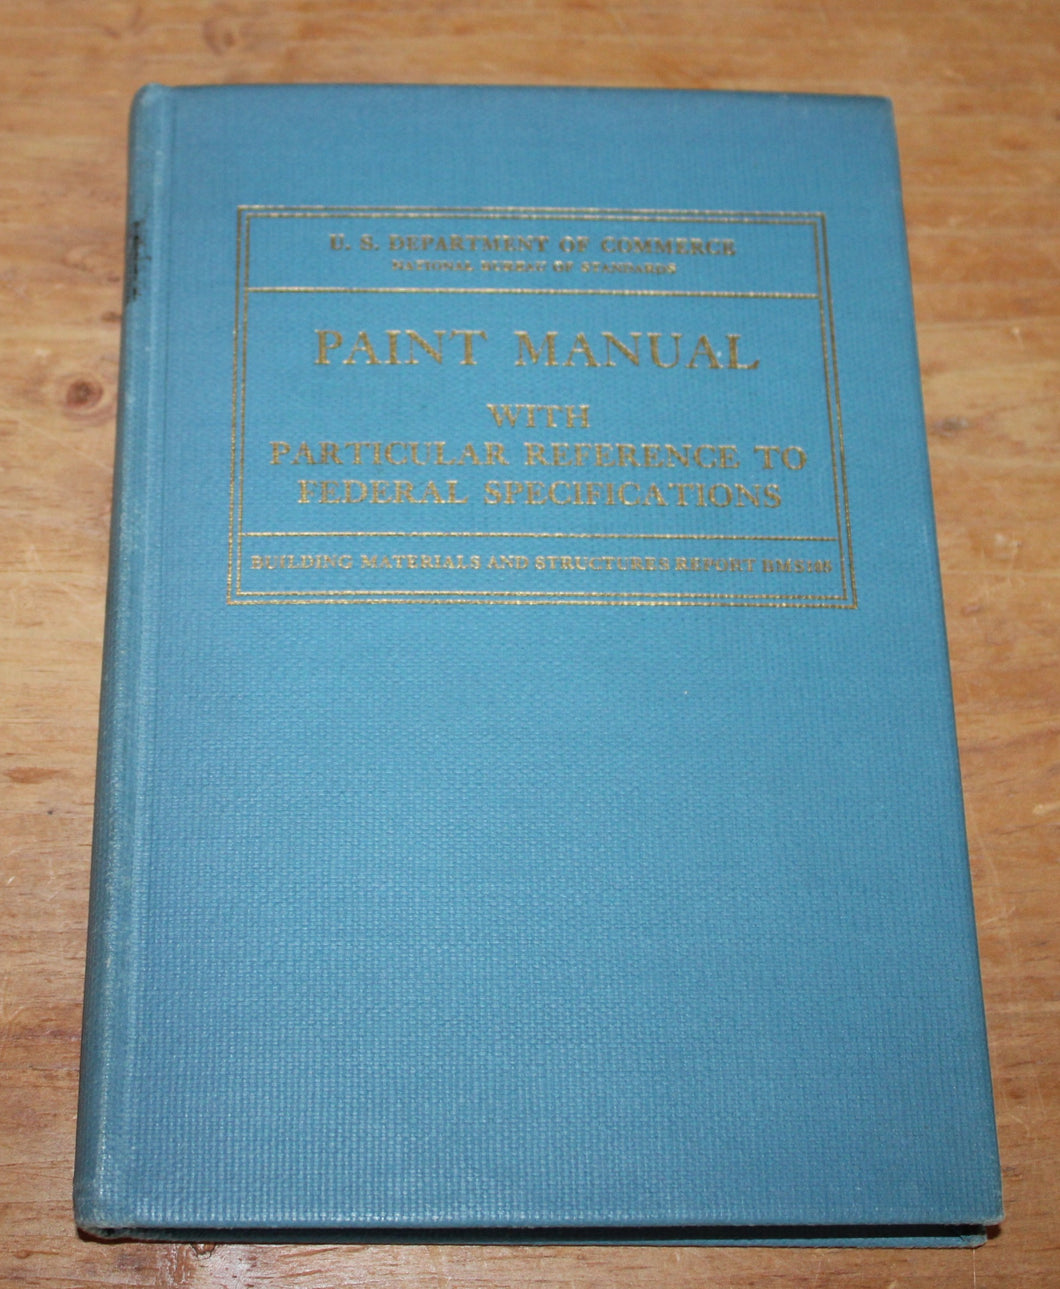 Paint Manual with Particular Reference to Federal Specifications October 11, 1945